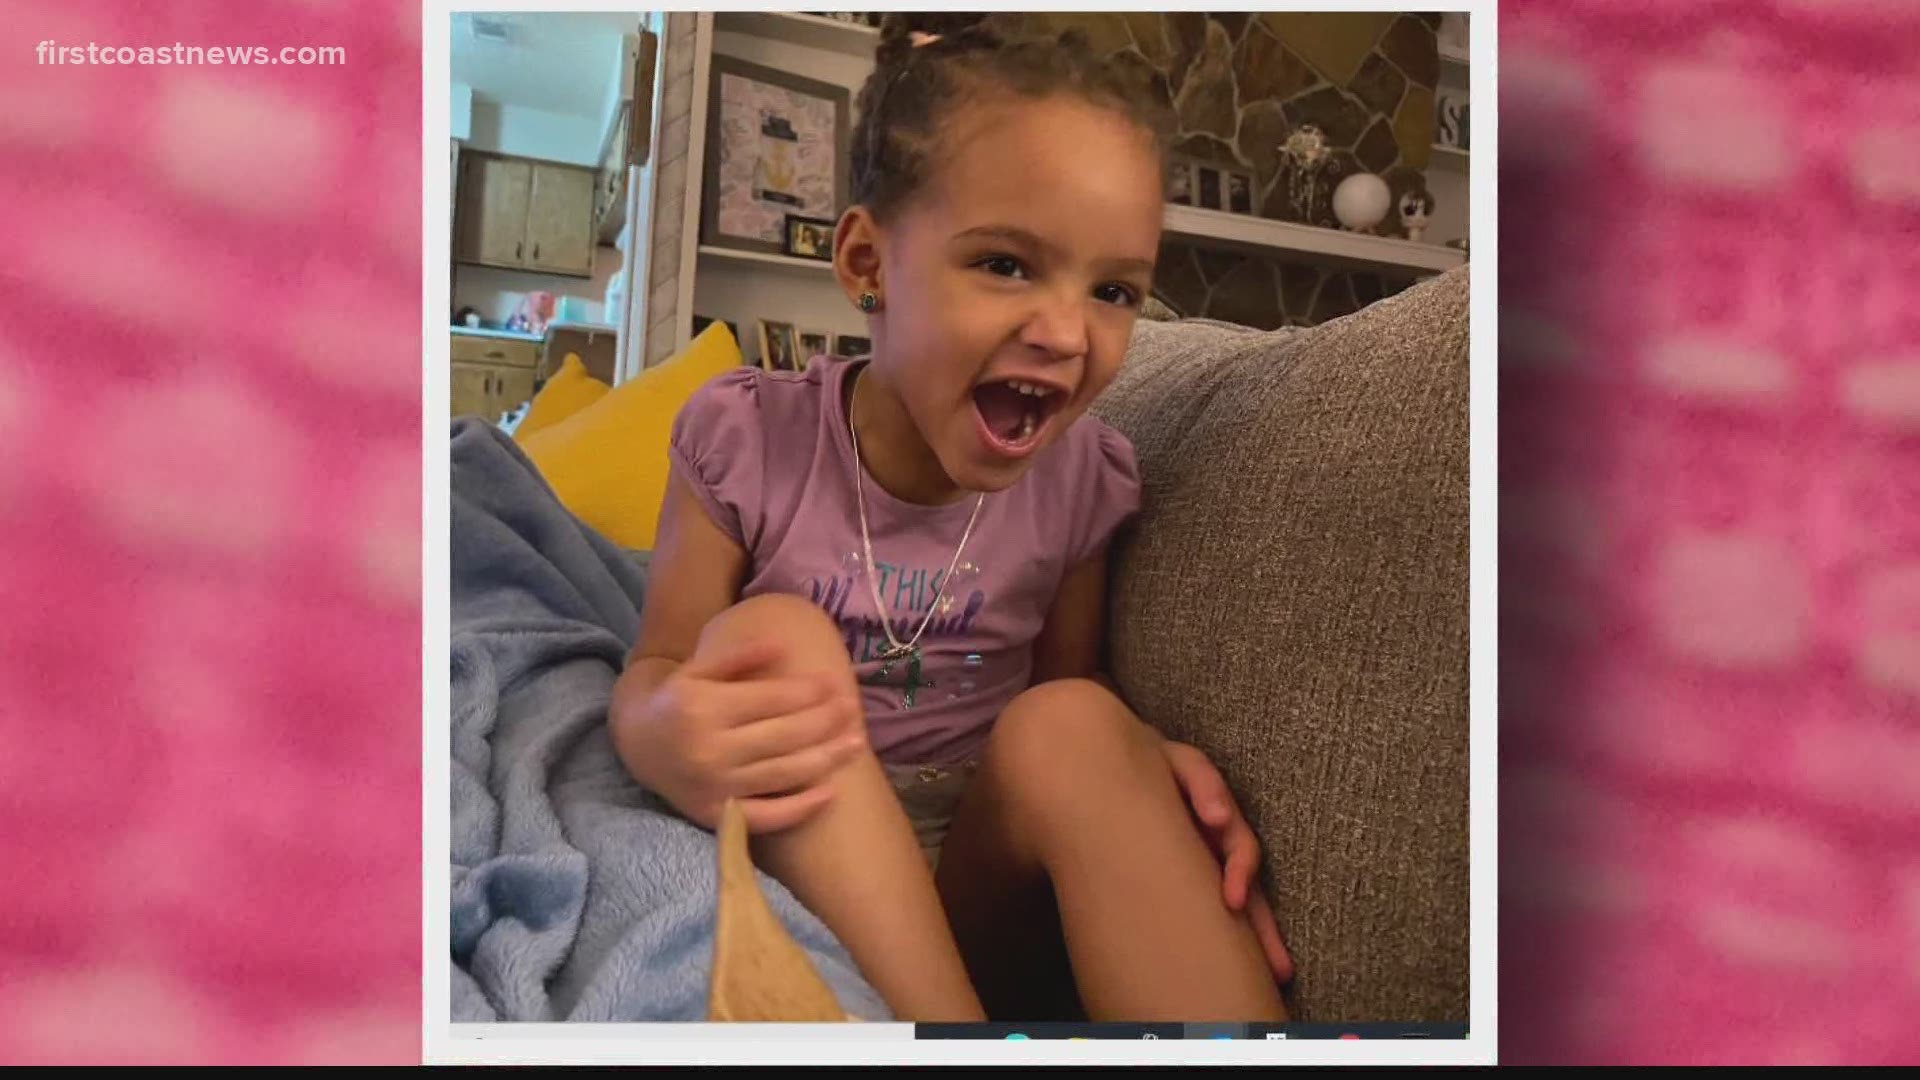 Ashley Owen says her 4-year-old bright spot is Aaliyah Davis, who's actually a cousin. But the two are so close, she may as well be "Aunt Ashley."